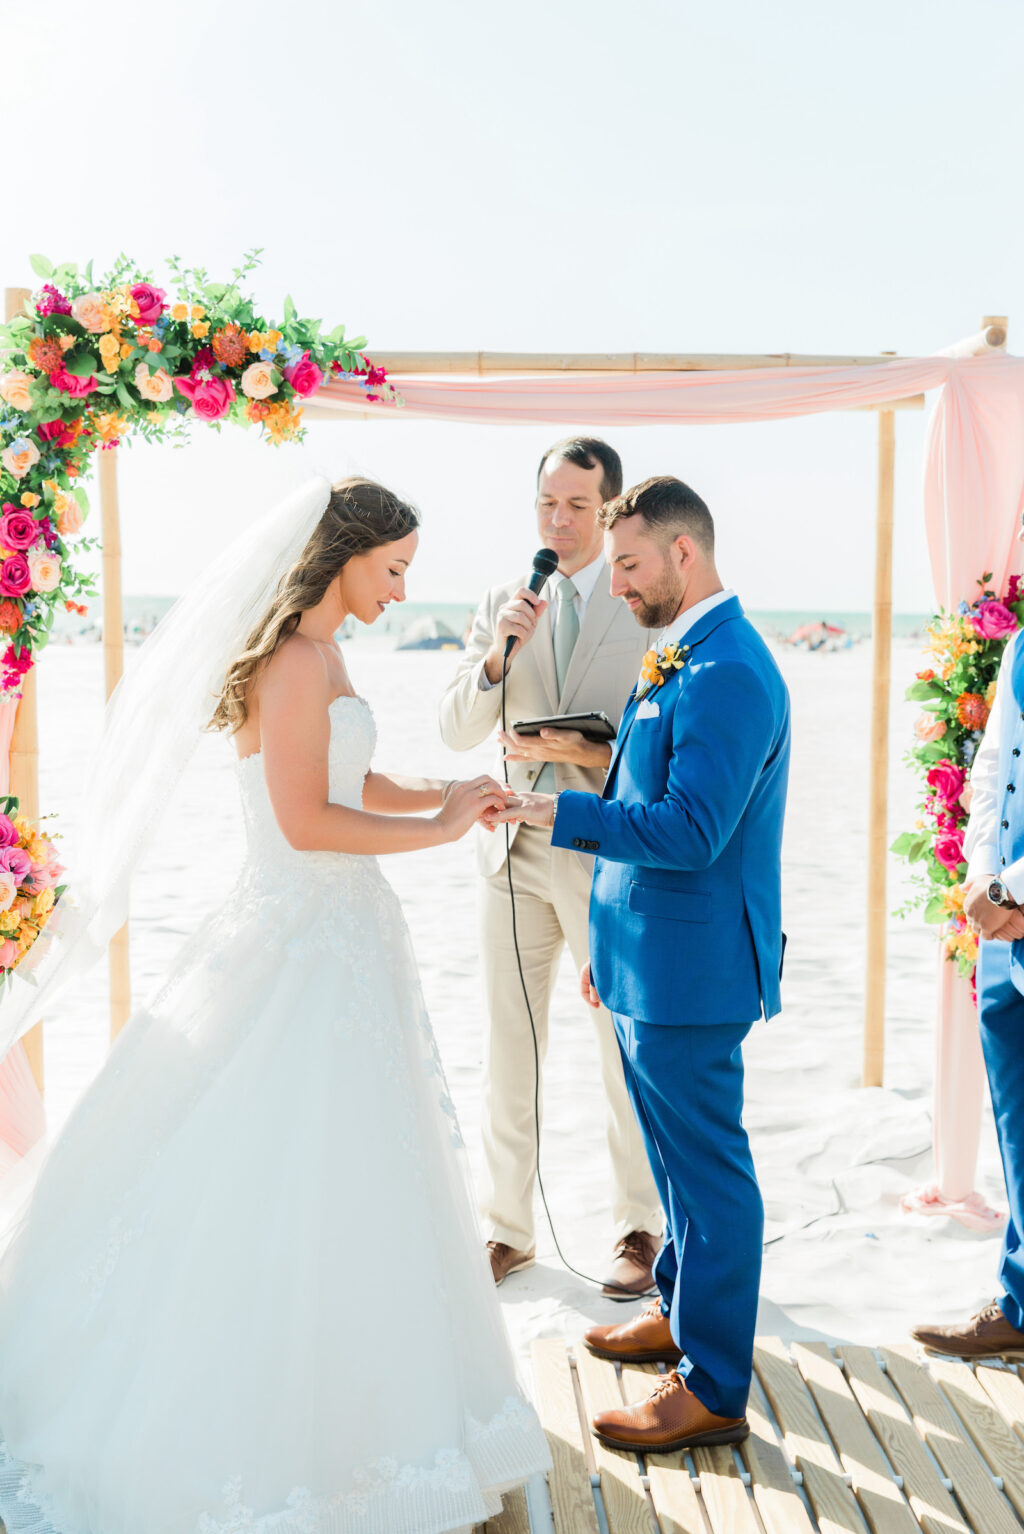 Bride and Groom Exchange Vows Portrait | Outdoor Beach Wedding Ceremony at Hilton Clearwater Beach